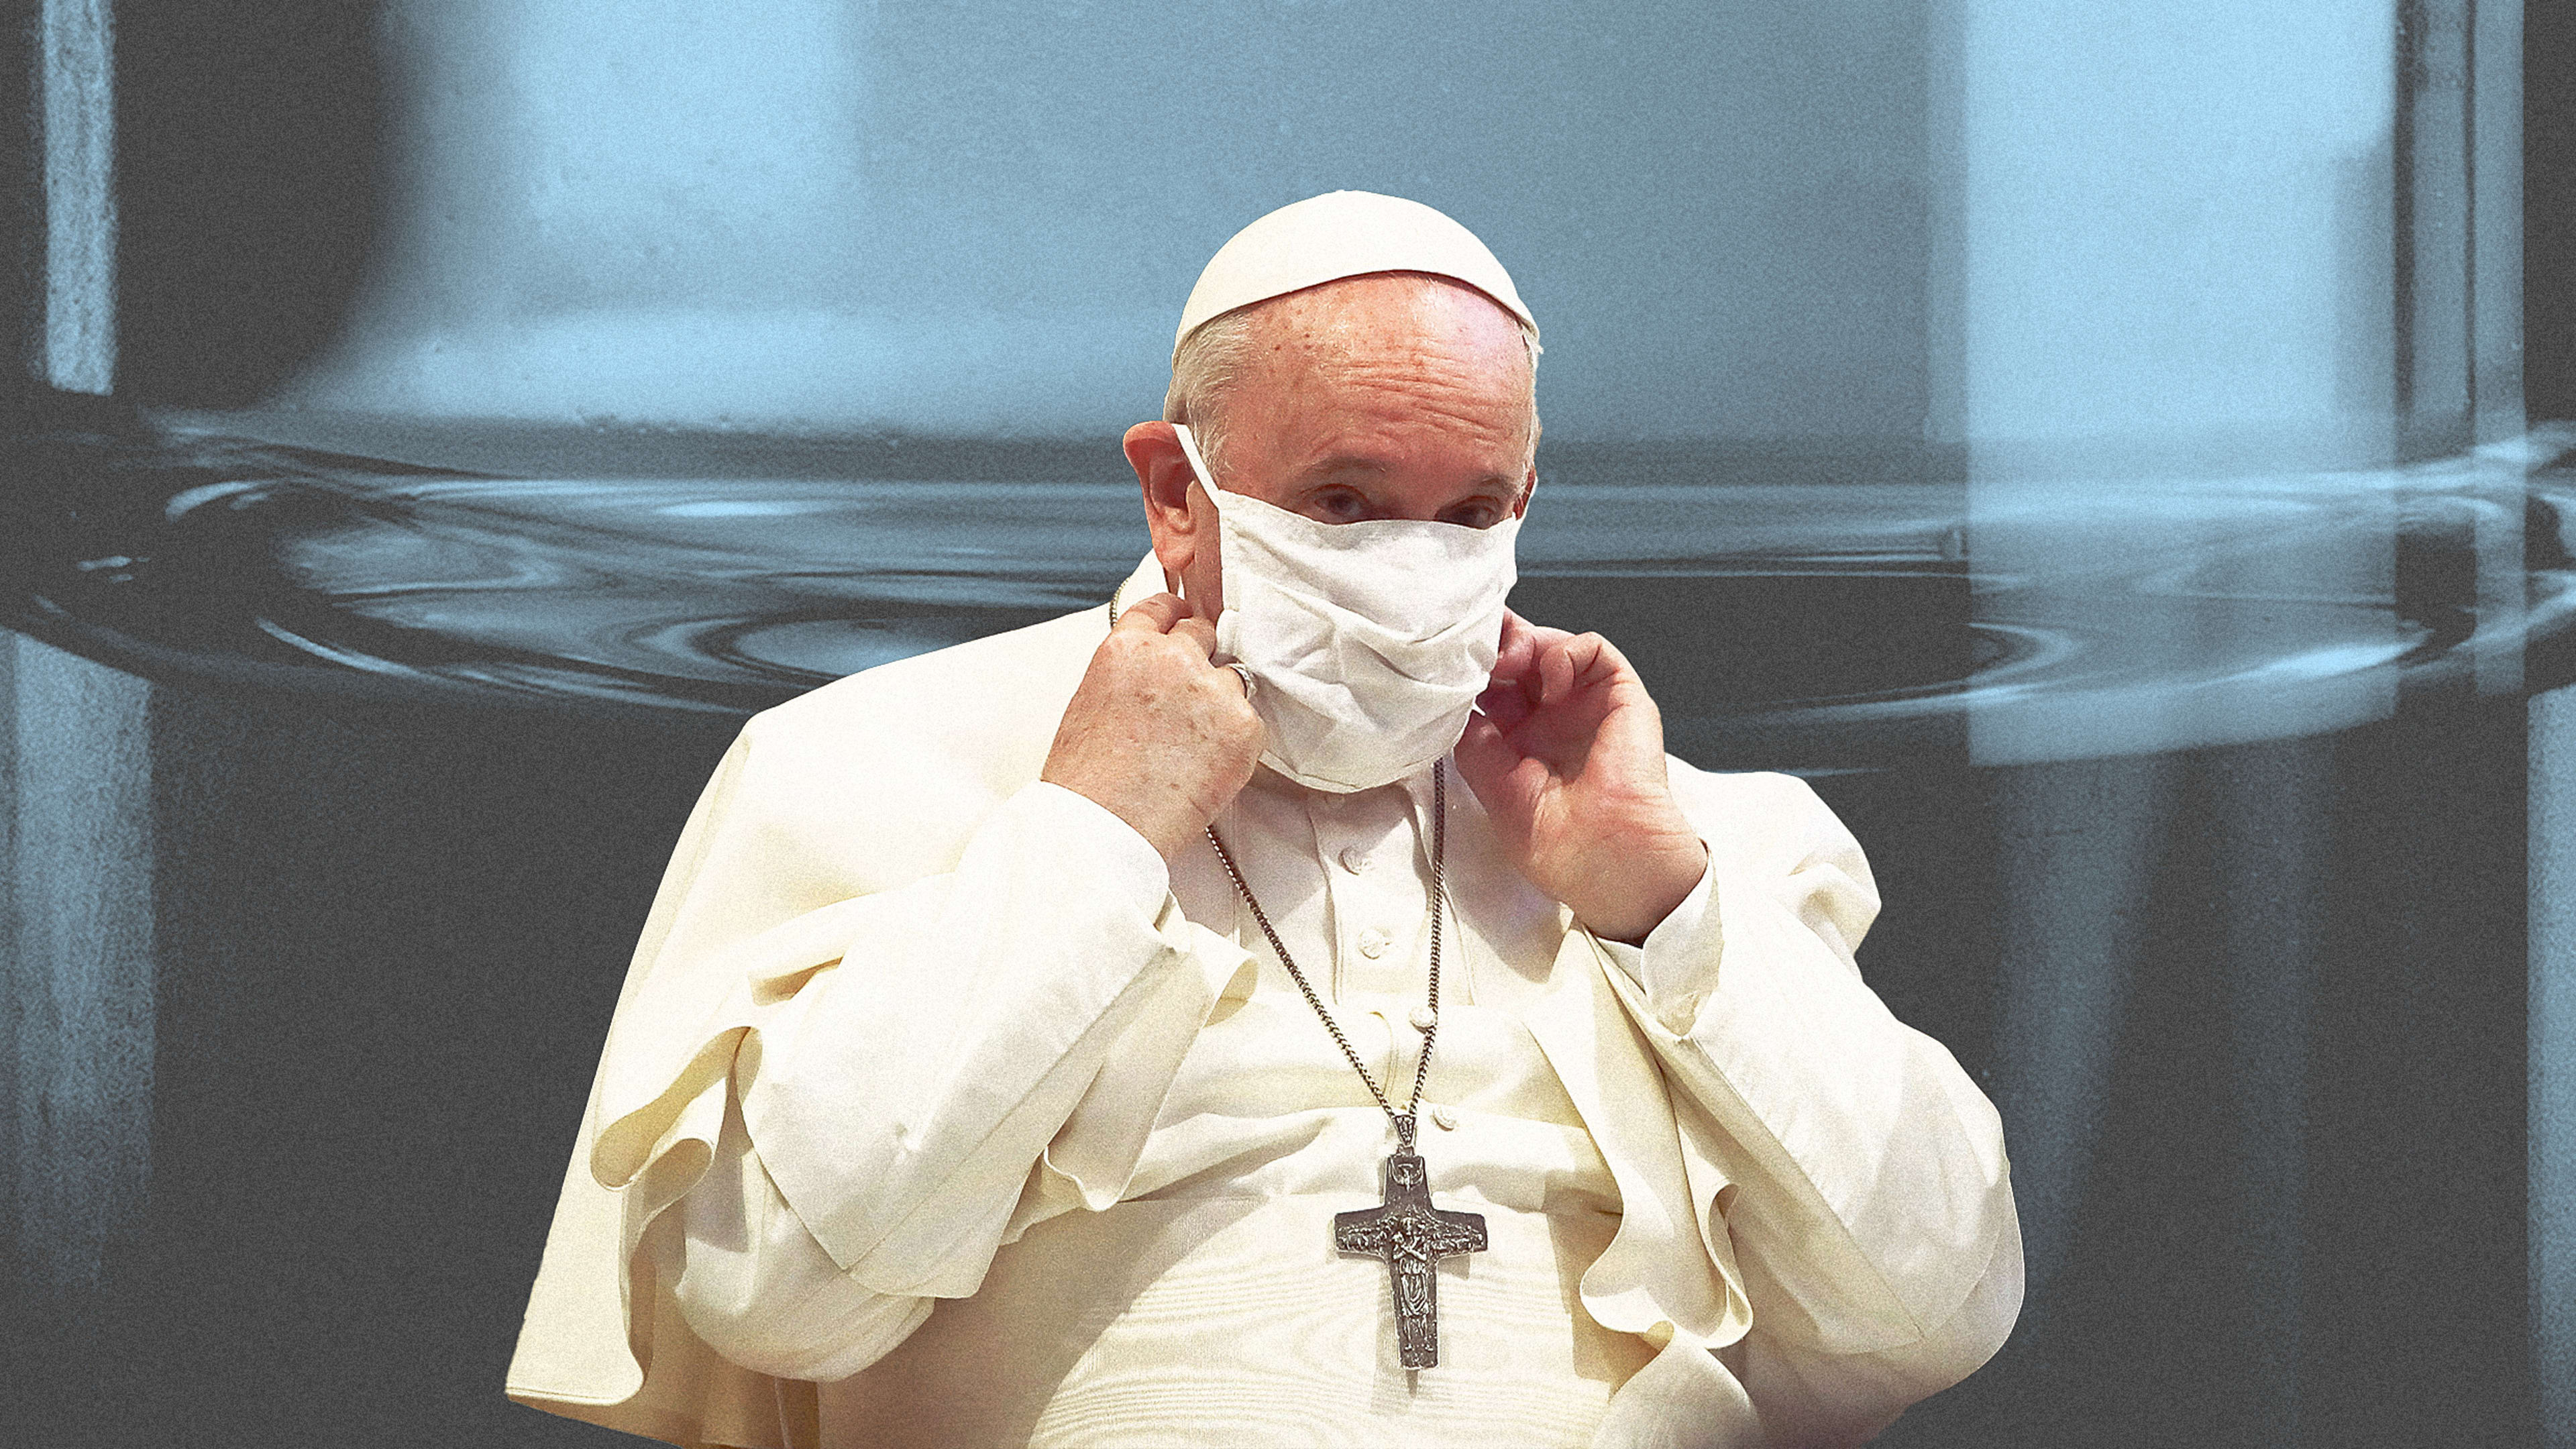 Watch Pope Francis’ new pro-vaccine PSA: Getting vaccinated is “an act of love”